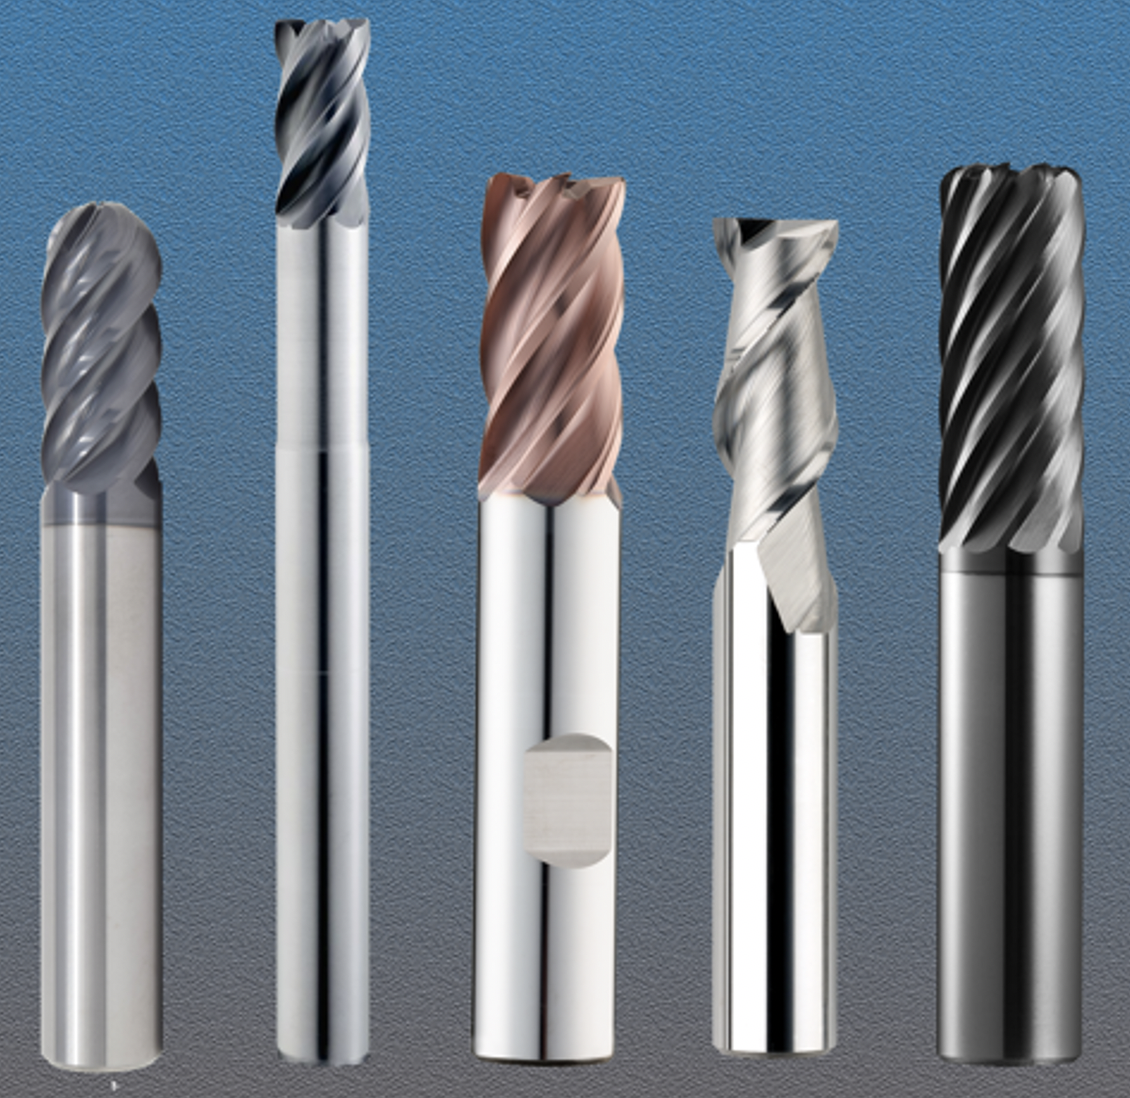 KYOCERA SGS and other cutting tool manufacturers offer a wide variety of application and material-specific grades, coatings and geometries. (Image courtesy of KYOCERA SGS Precision Tools)